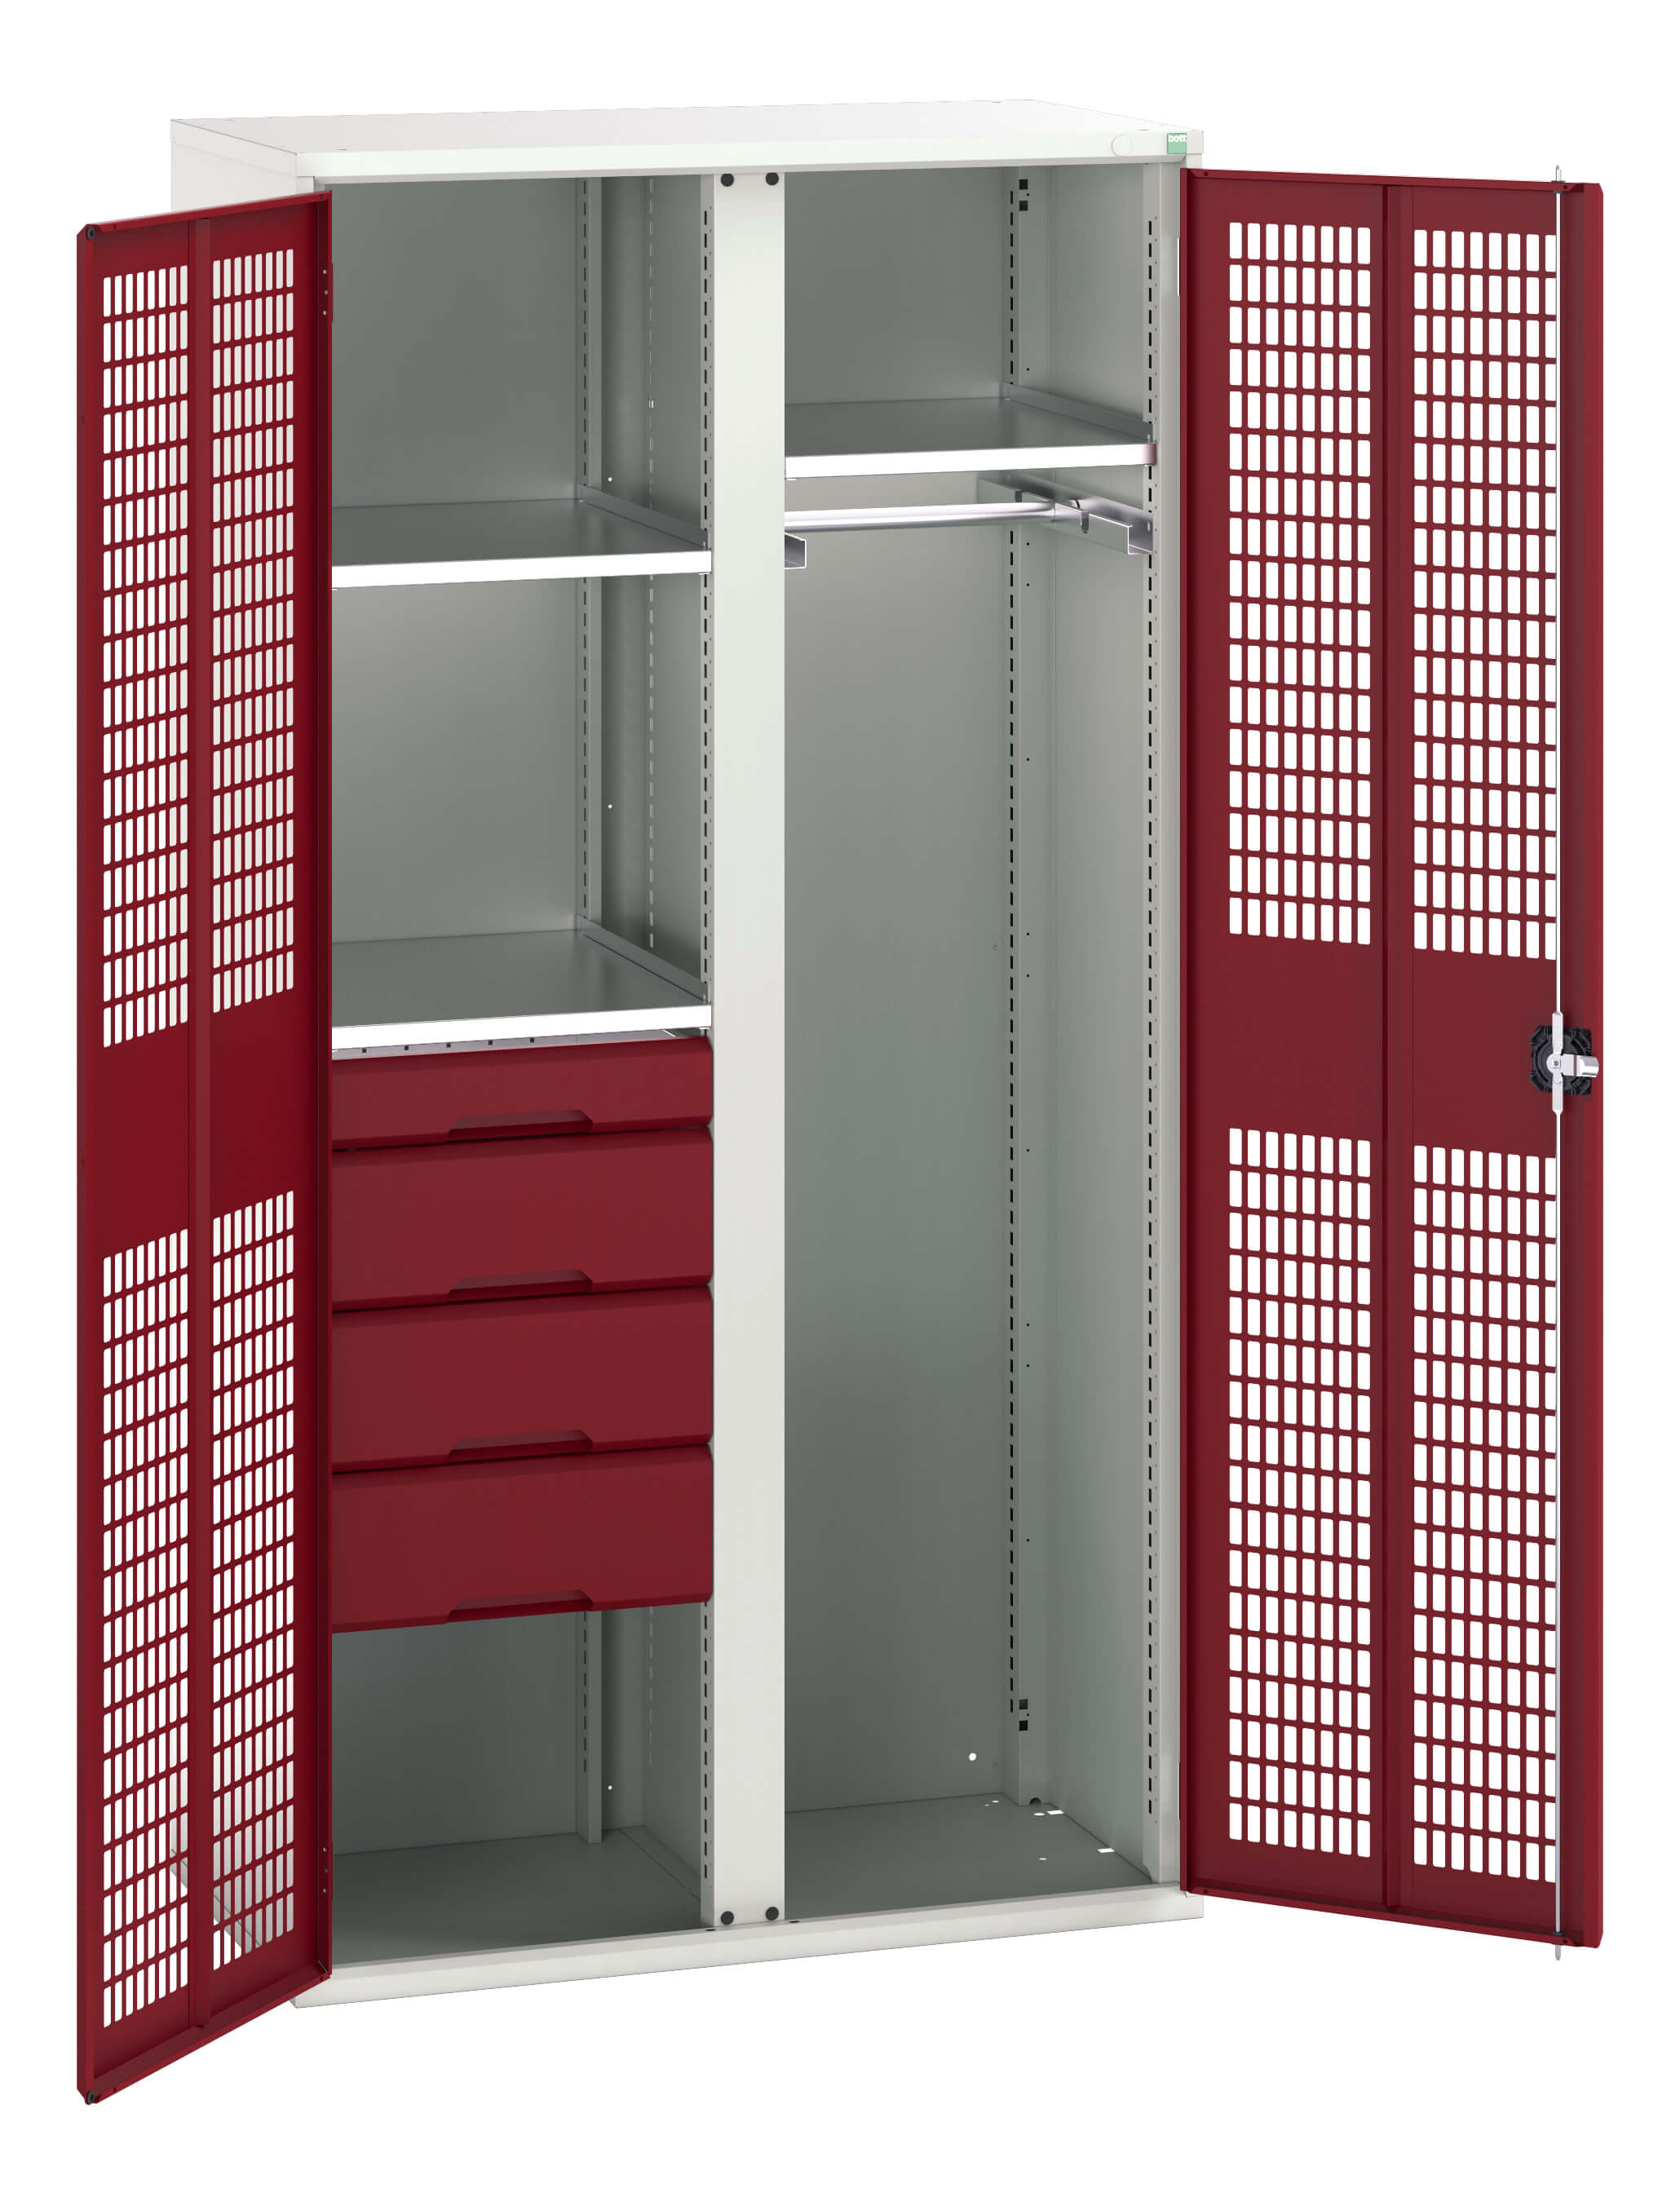 Bott Verso Ventilated Door Ppe / Janitorial Kitted Cupboard With Vertical Partition - 16926776.24